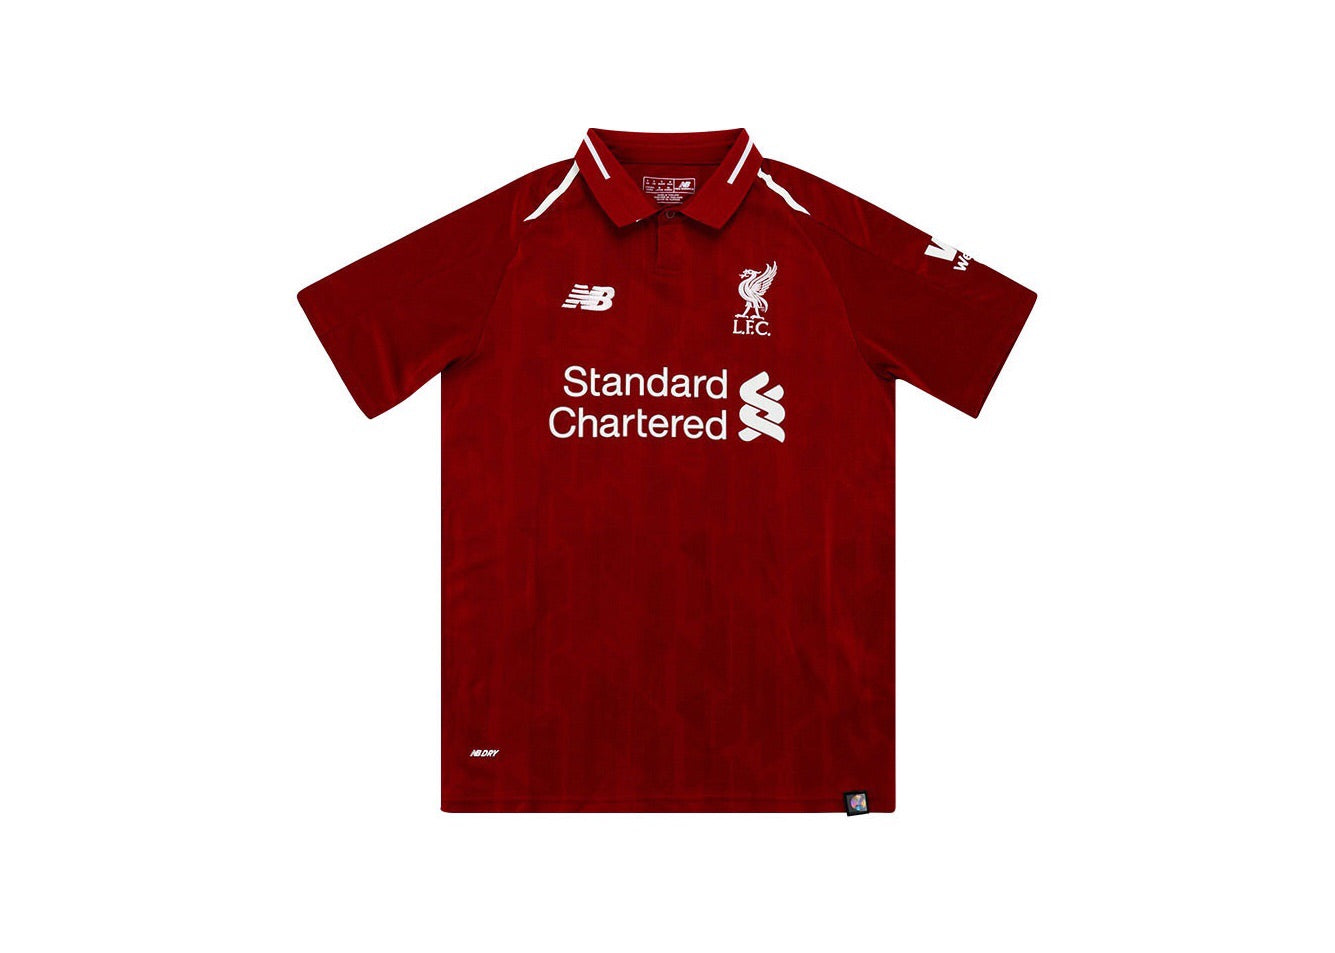 2018-2019 LIVERPOOL HOME JERSEY *W/TAGS* XL (YOUTH)